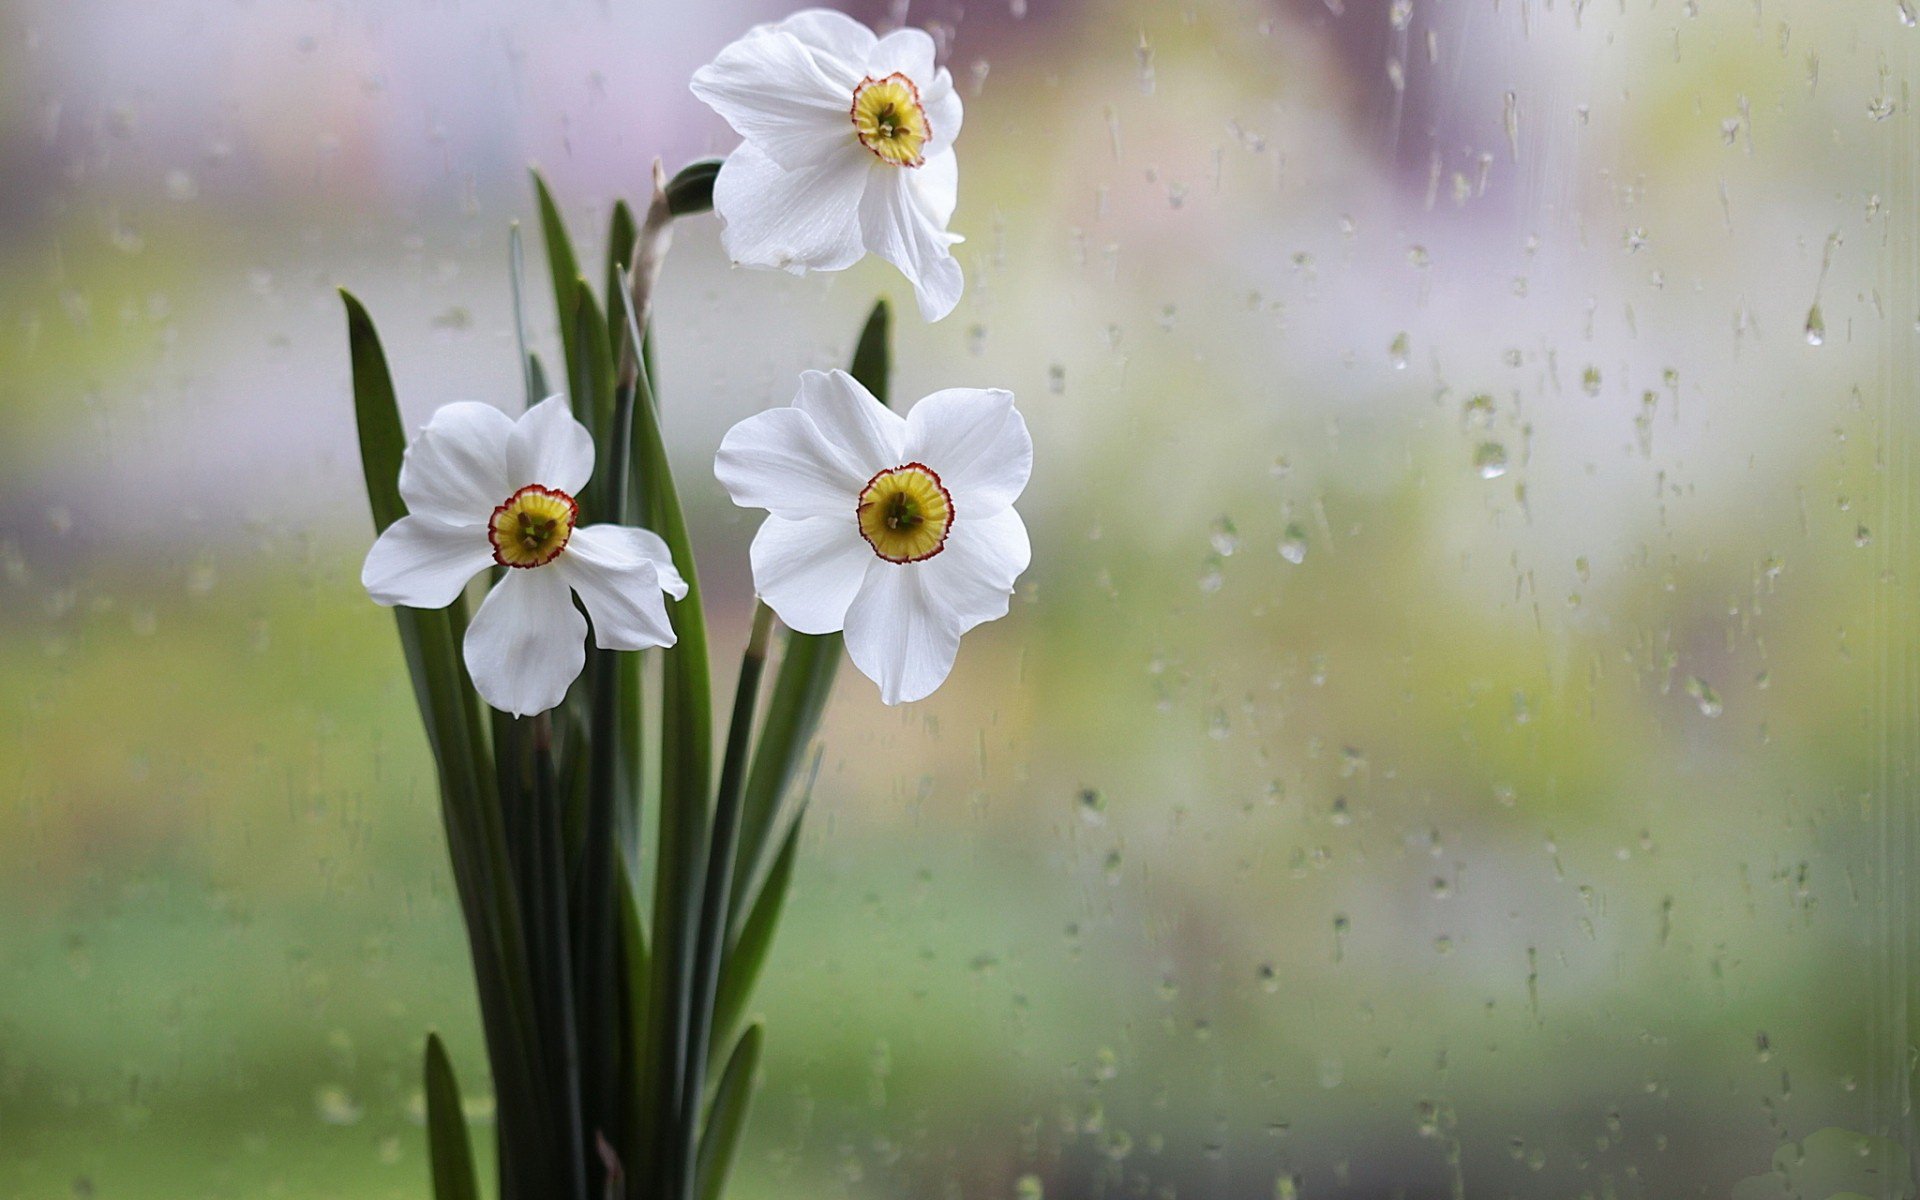 158 daffodil hd wallpapers background images wallpaper abyss 158 daffodil hd wallpapers background